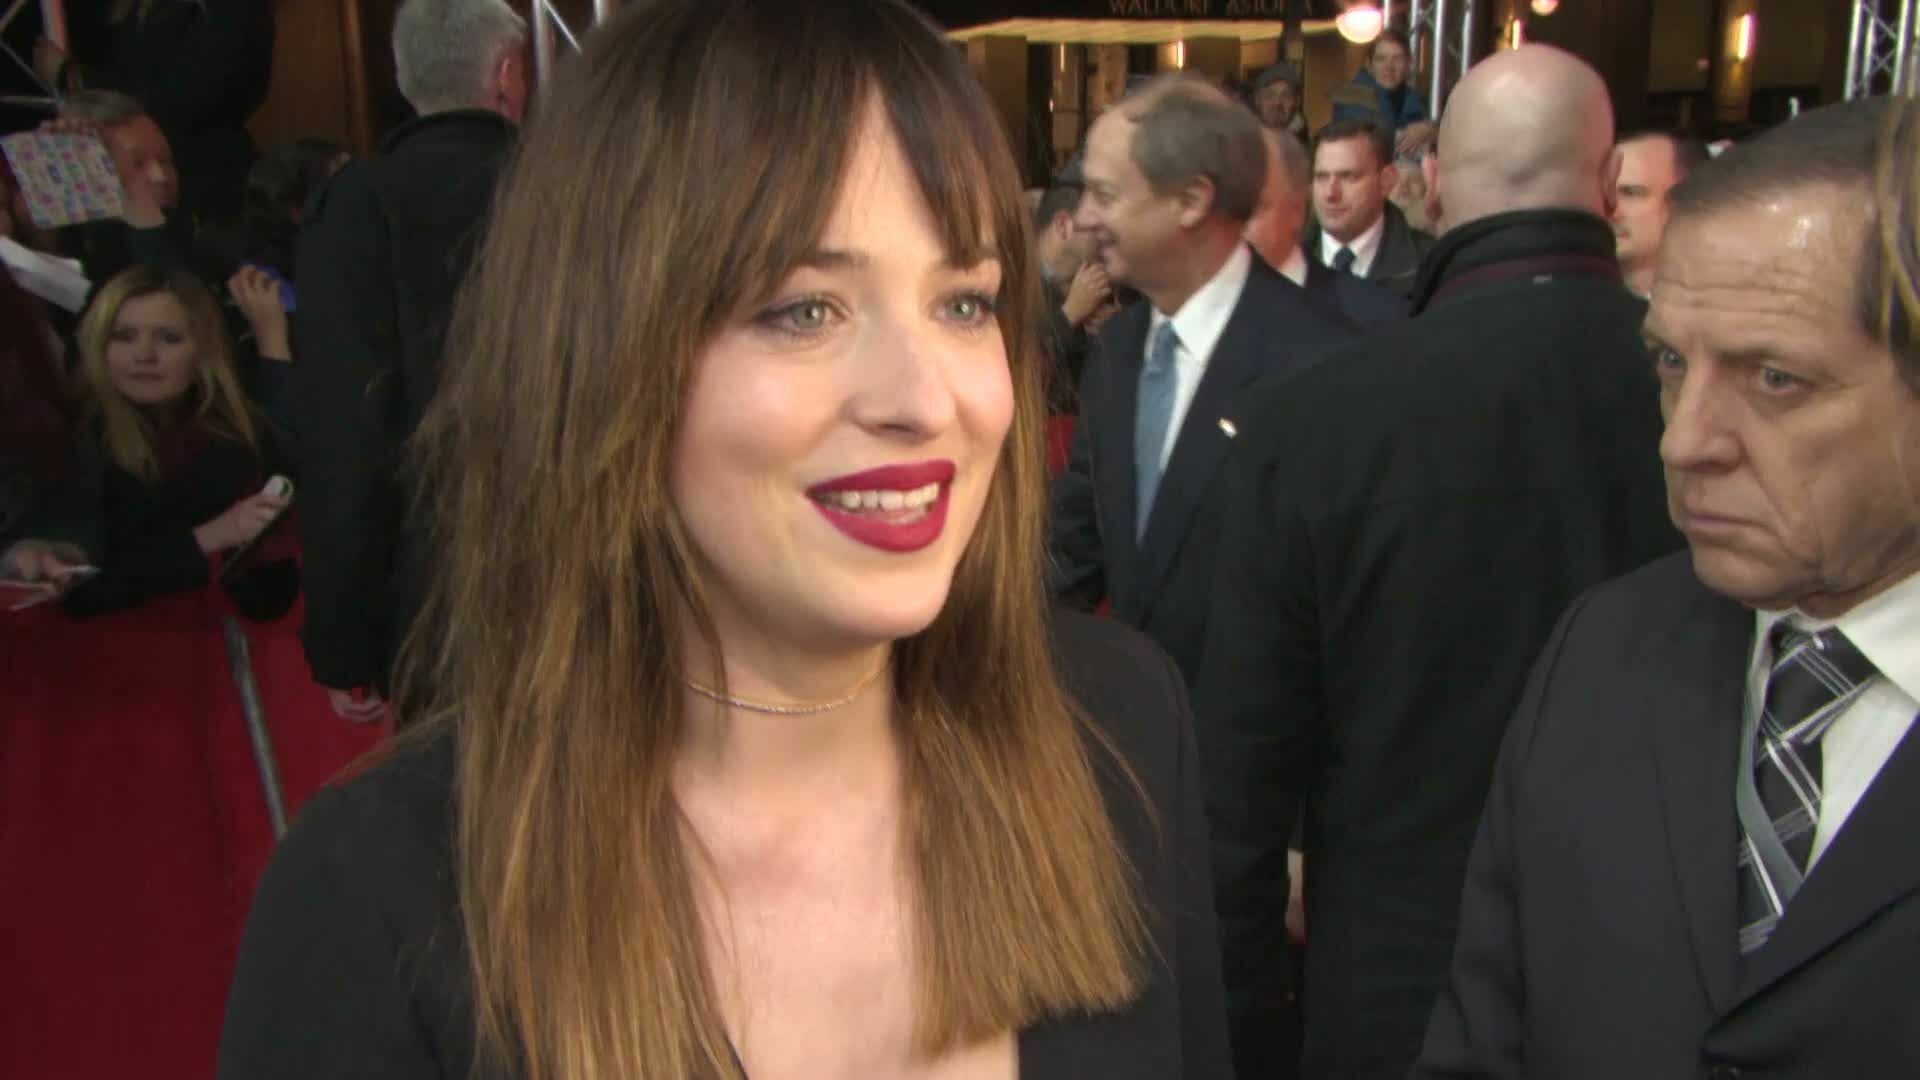 Berlinale 2015: Premiere 50 Shades of Grey